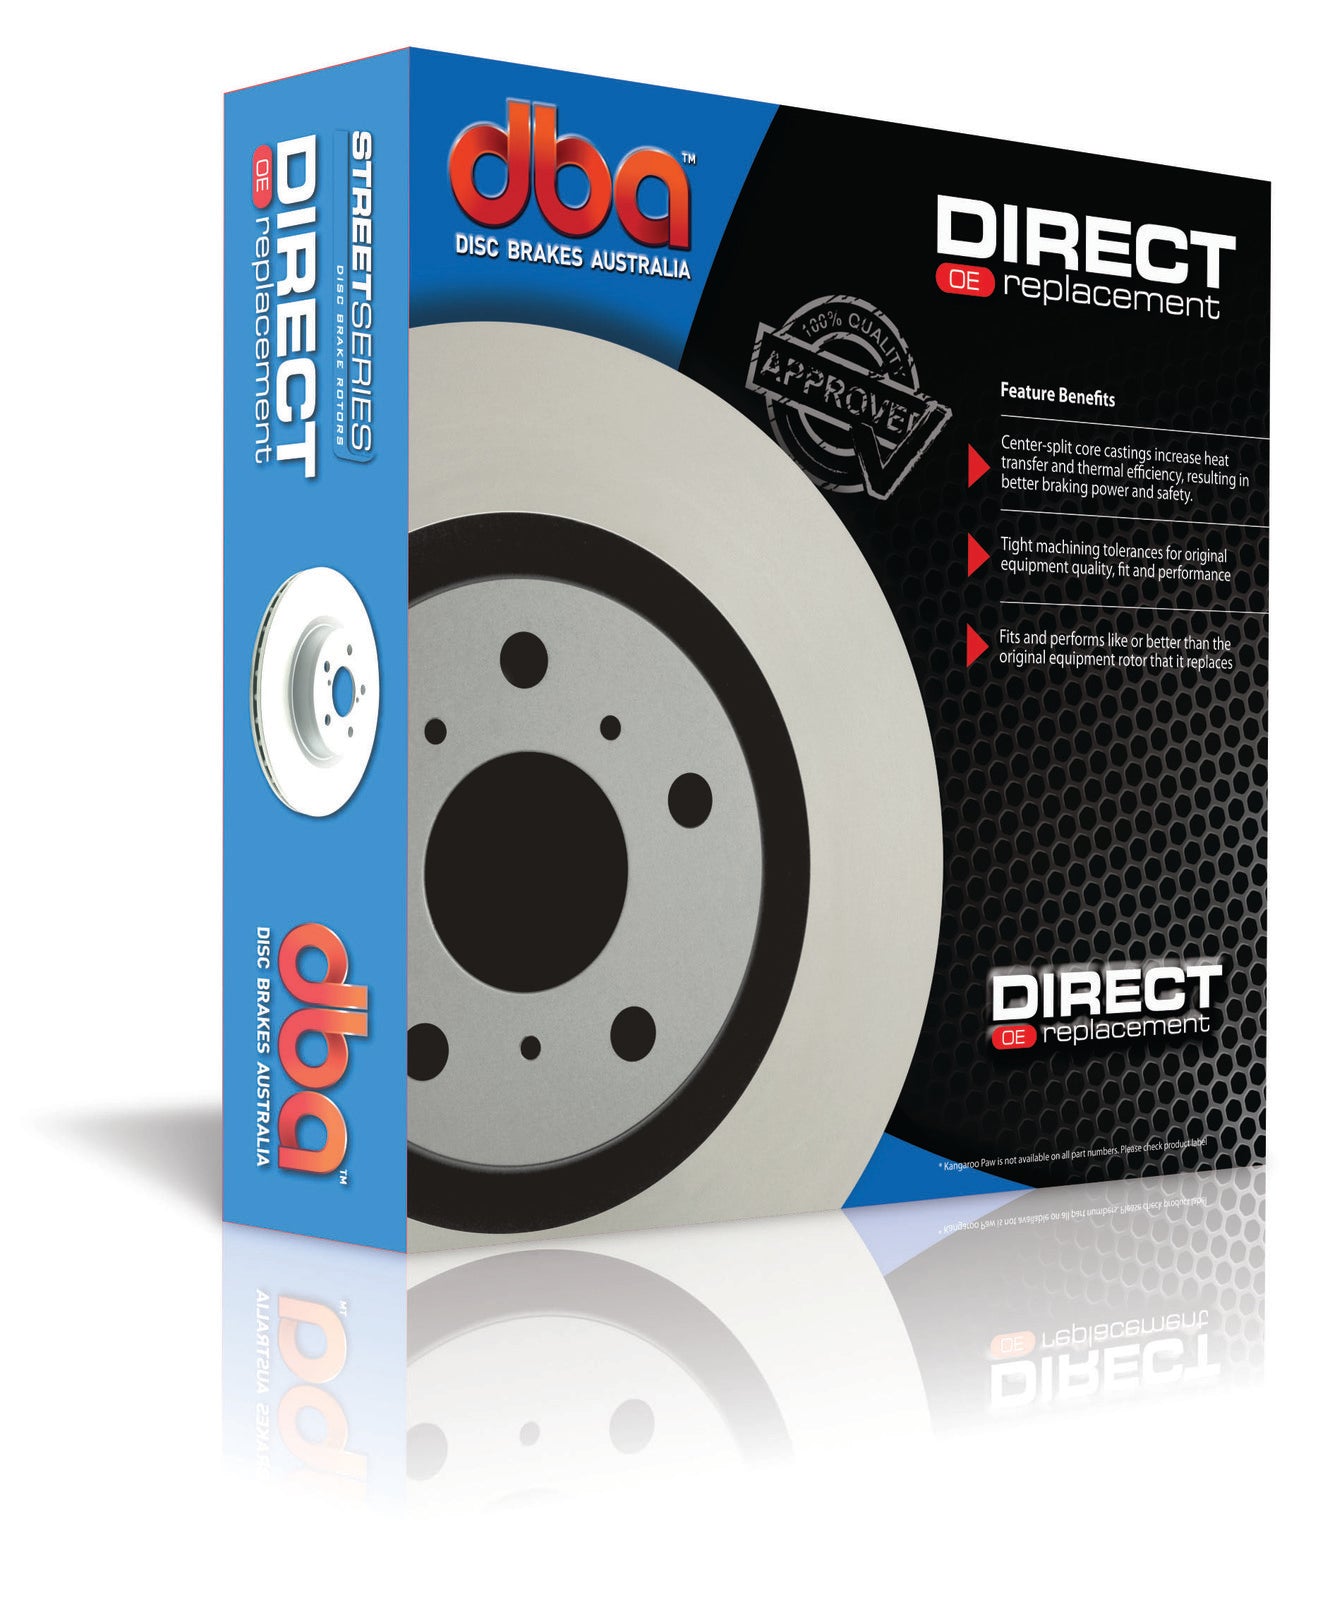 Street Series 2x Standard Front Rotors (Camry/Apollo 93-02)